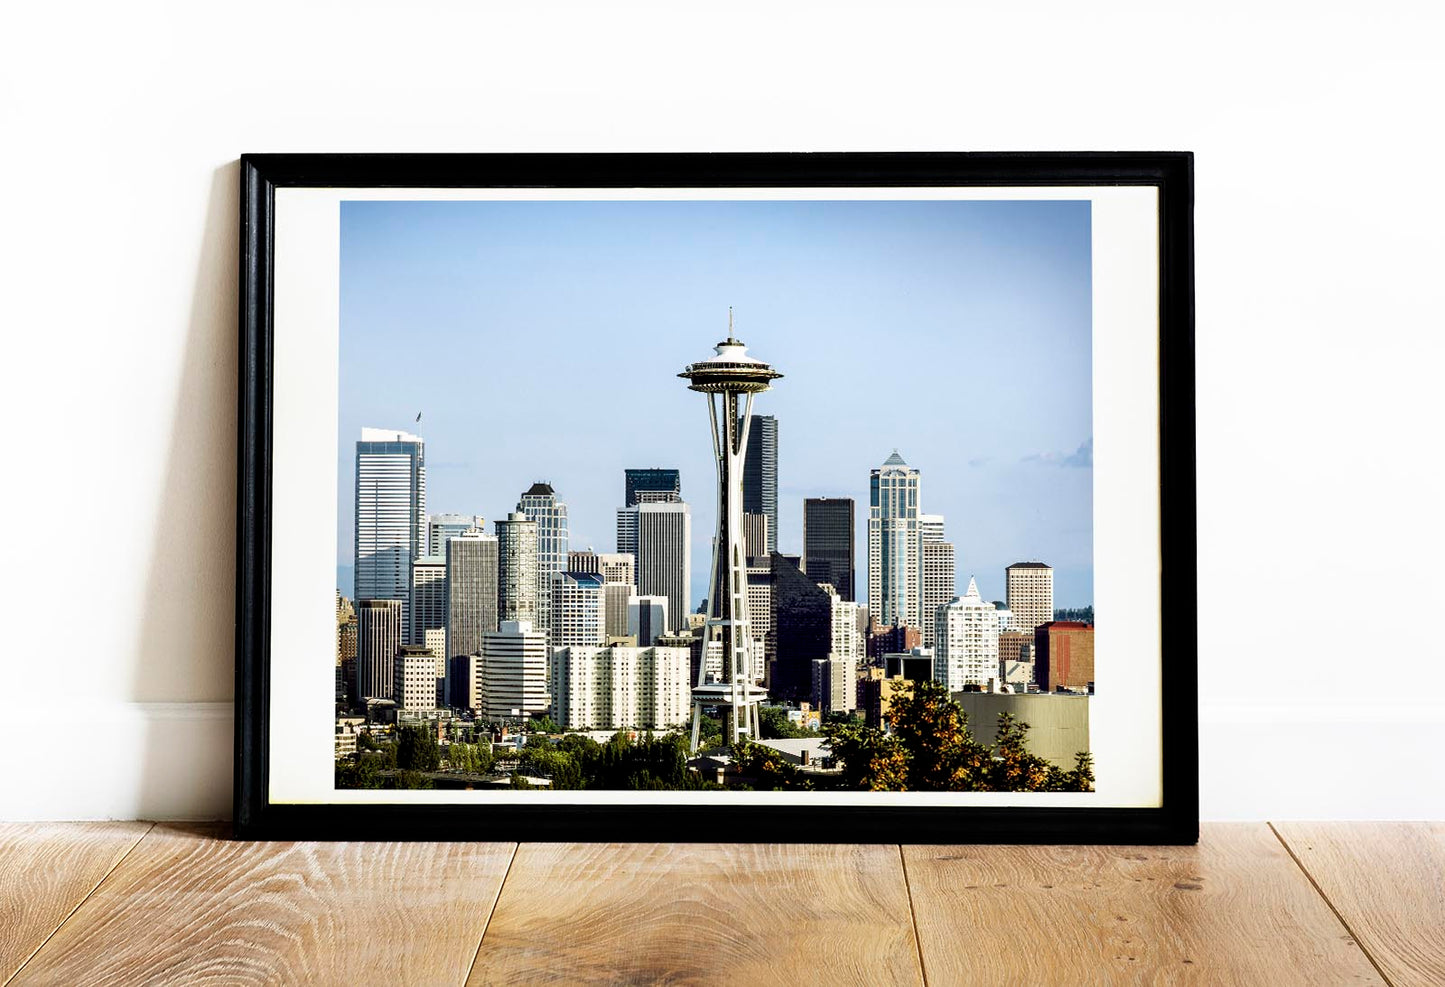 Seattle Skyline featuring the Space Needle by Carol M. Highsmith